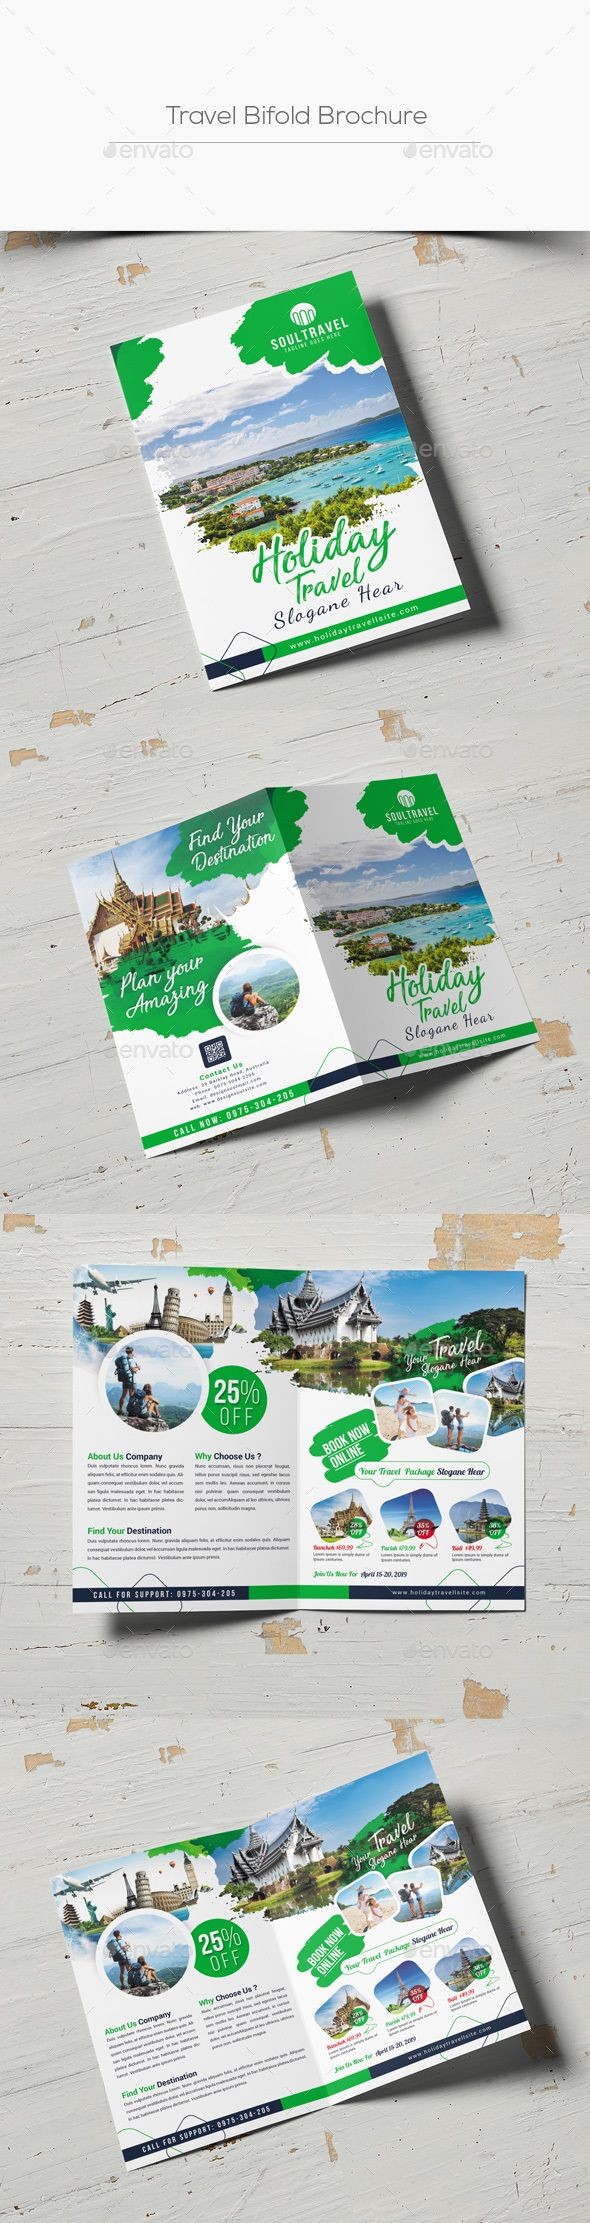 Travel Bifold Brochure Brochures Template And Photoshop Cs5 Templates For